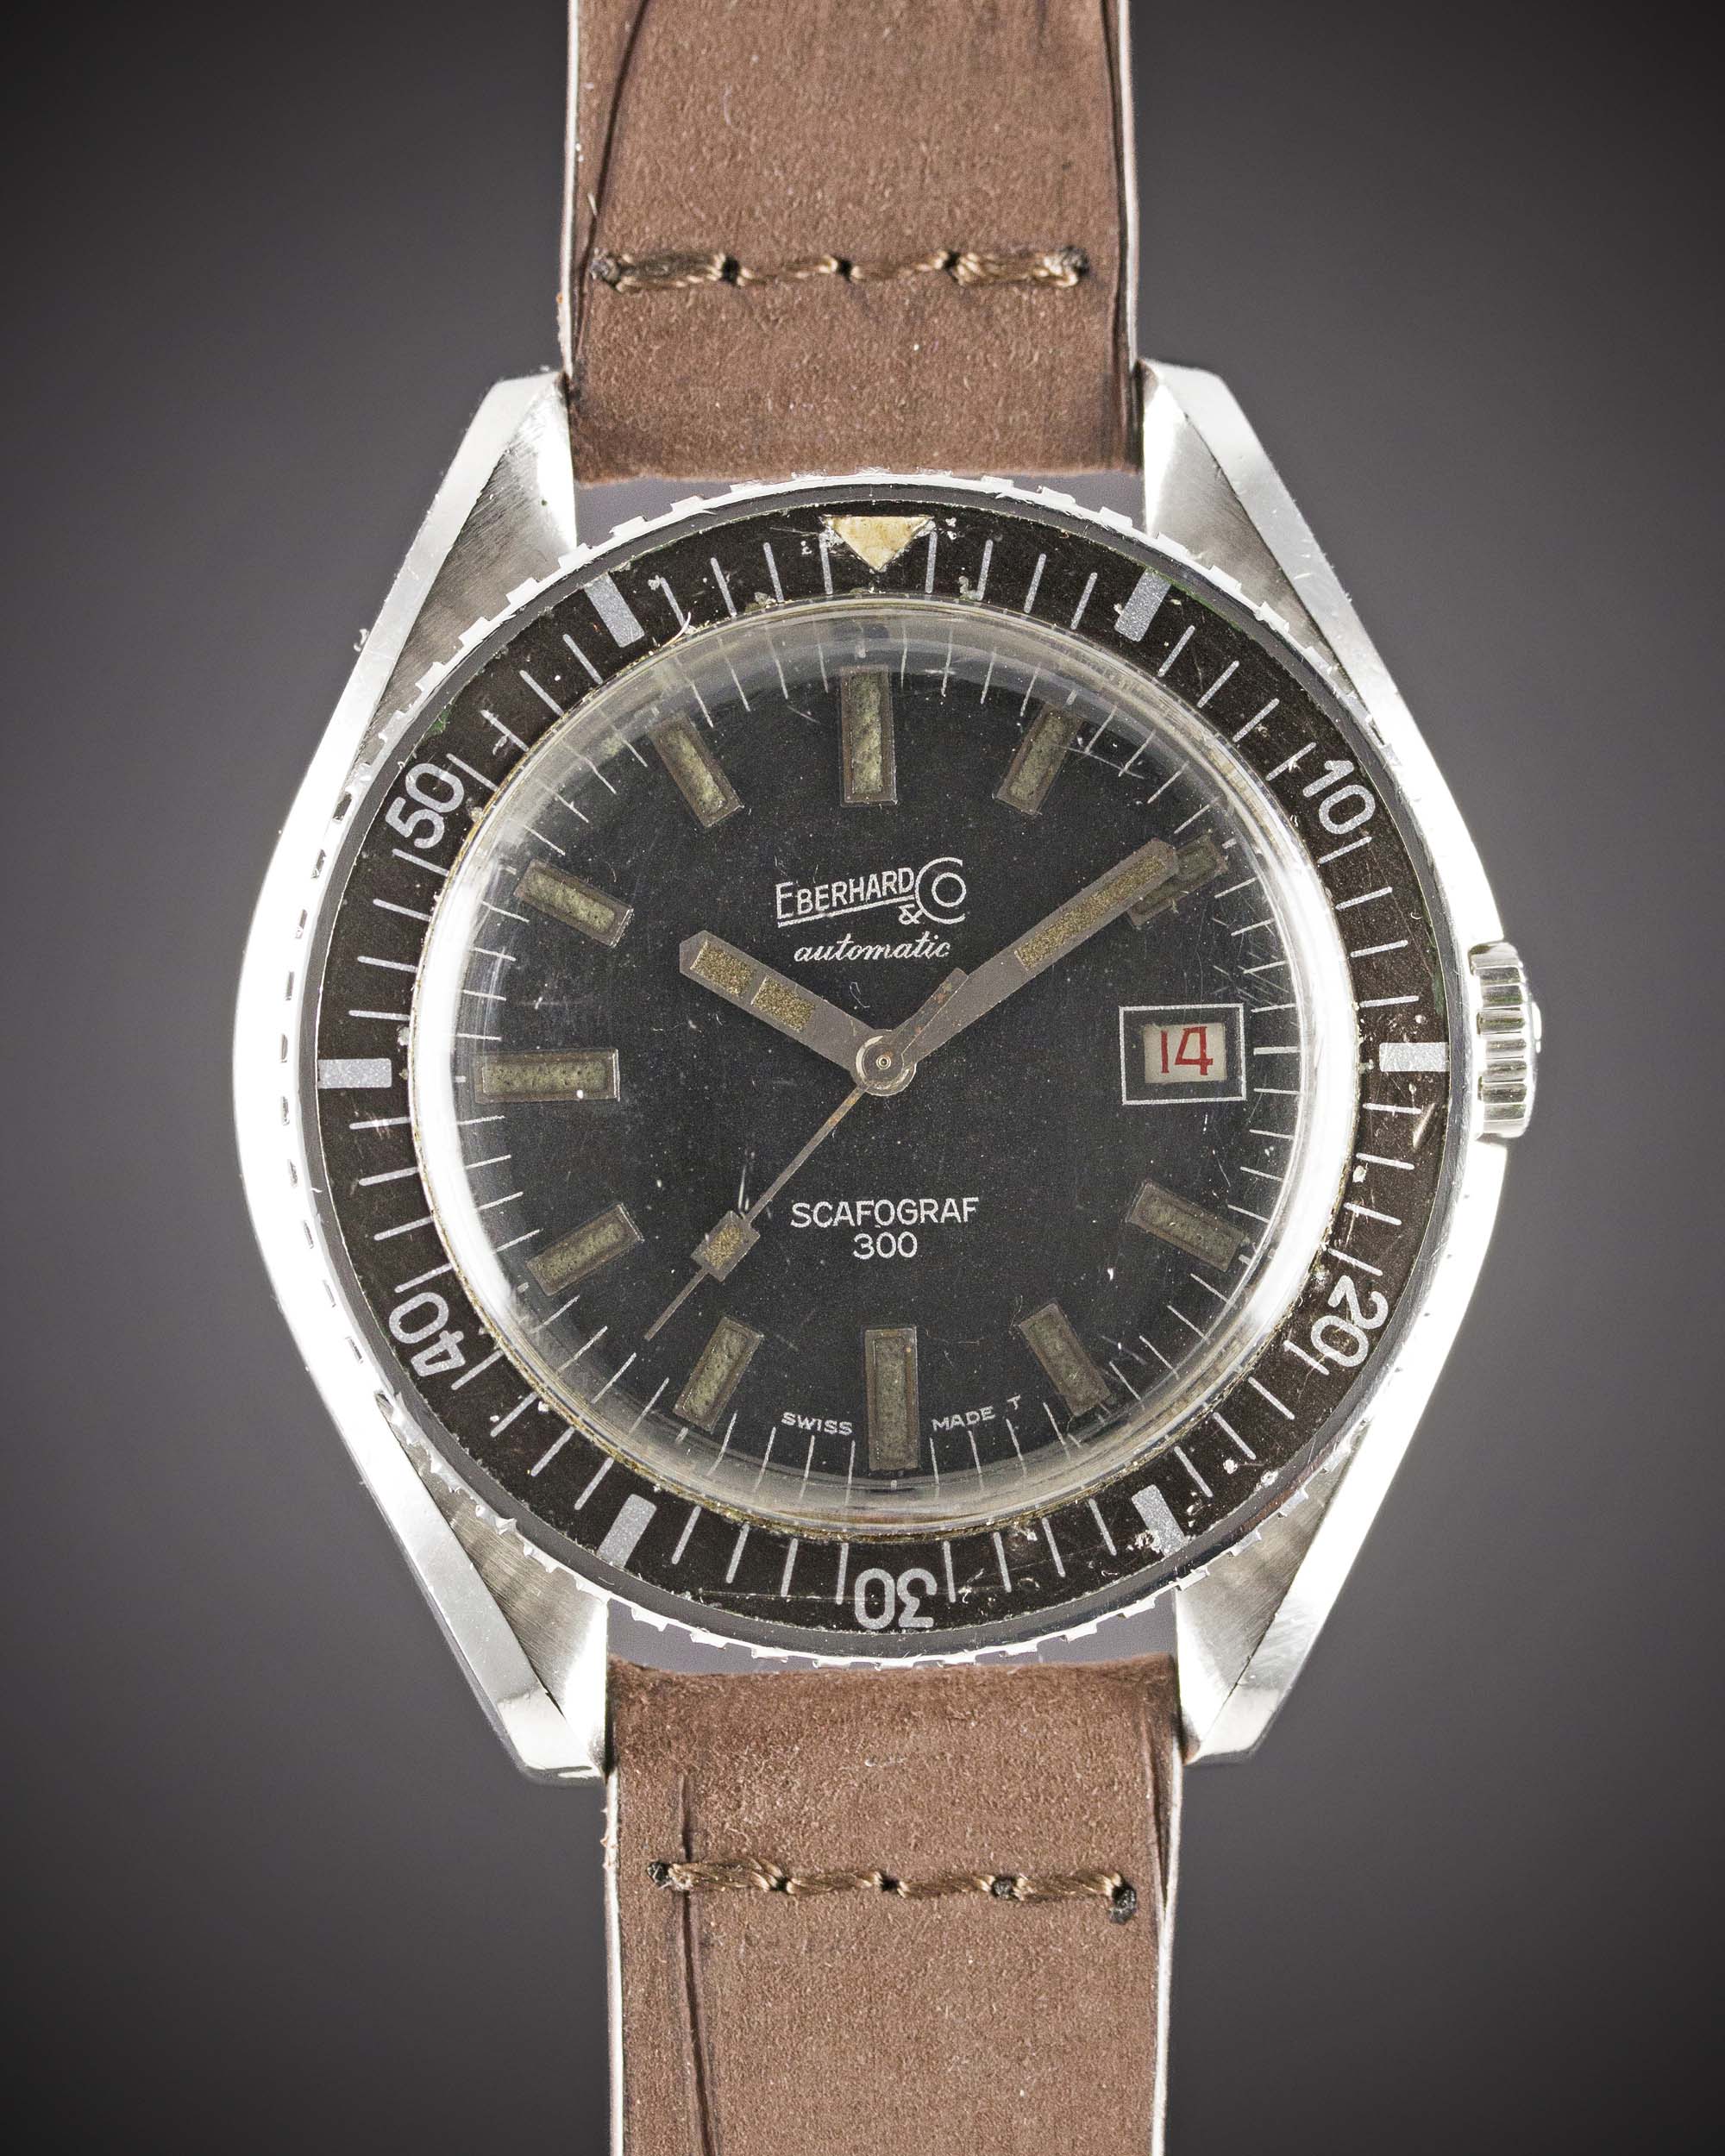 A RARE GENTLEMAN'S STAINLESS STEEL EBERHARD & CO SCAFOGRAF 300 AUTOMATIC DIVERS WRIST WATCH CIRCA - Image 2 of 2